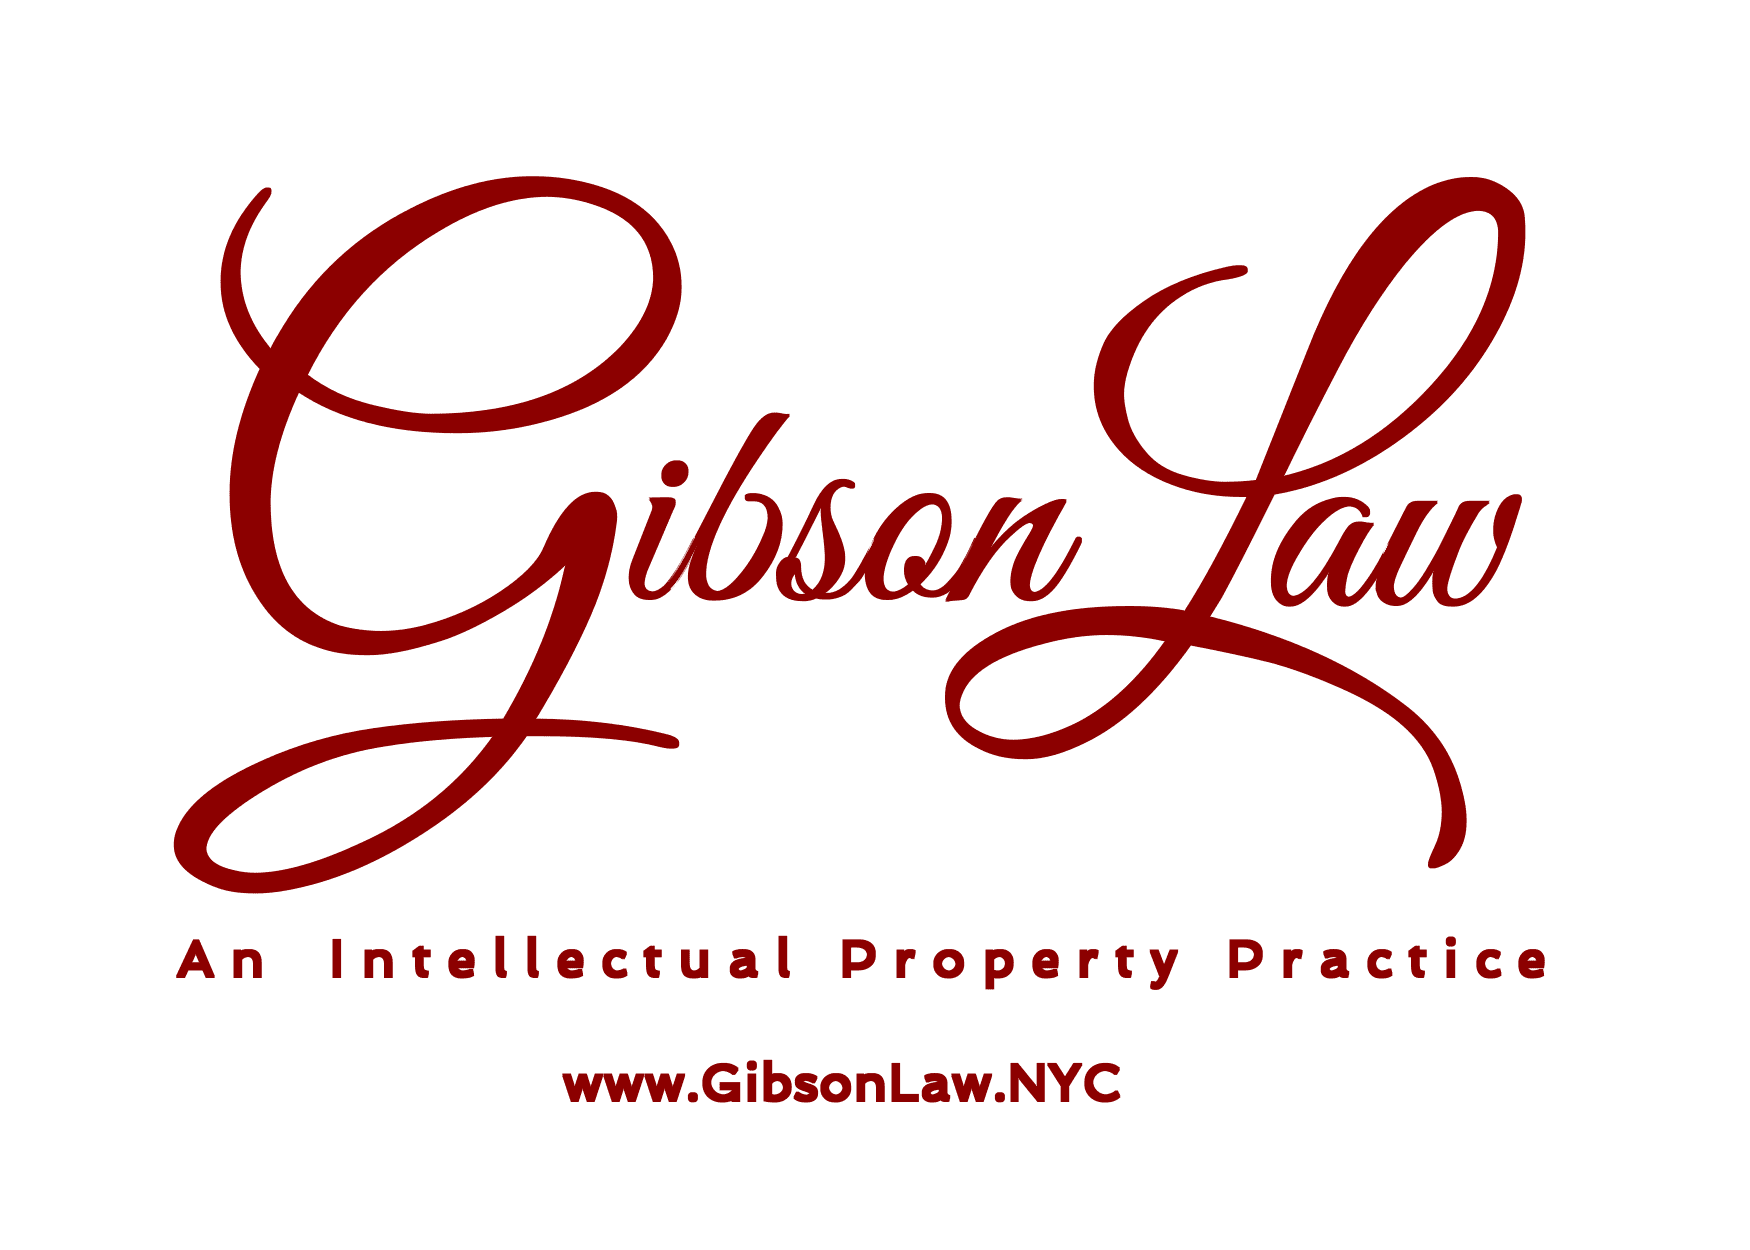 The Gibson Law Practice PLLC